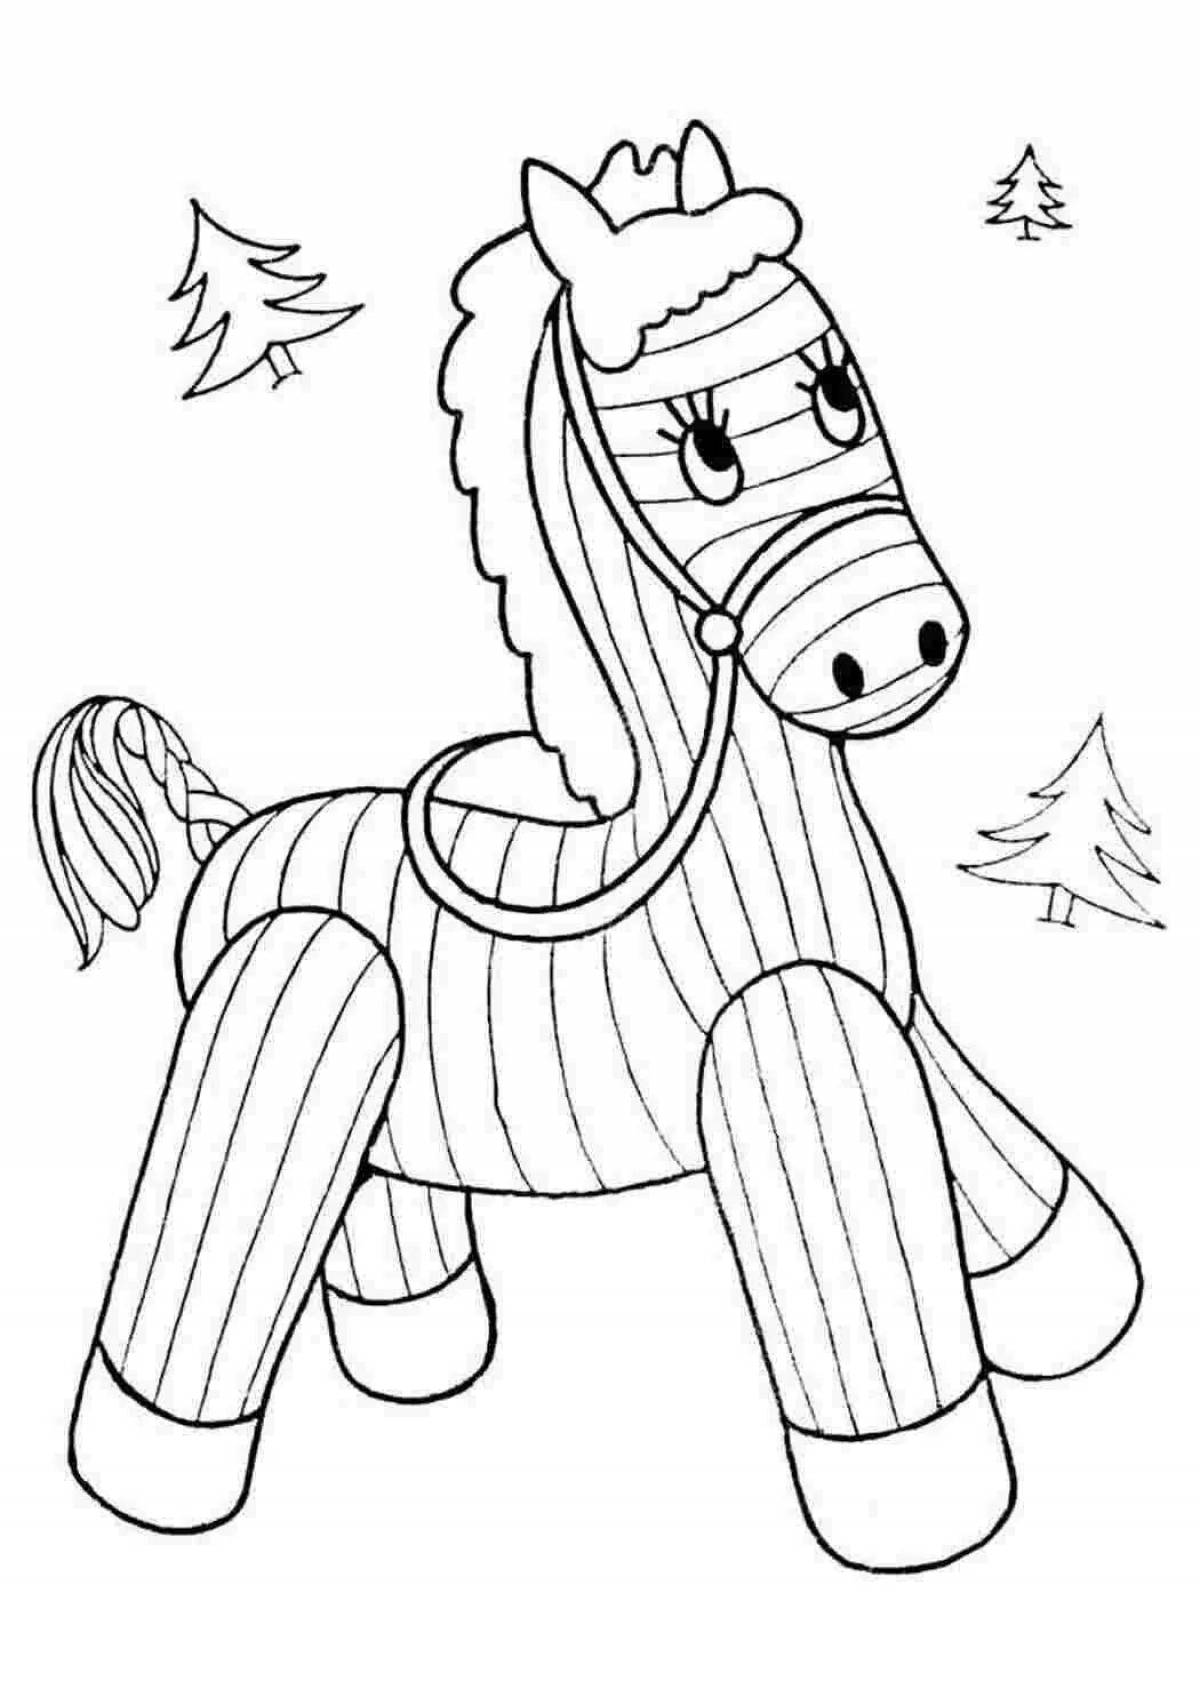 Coloring book exquisite horse toy